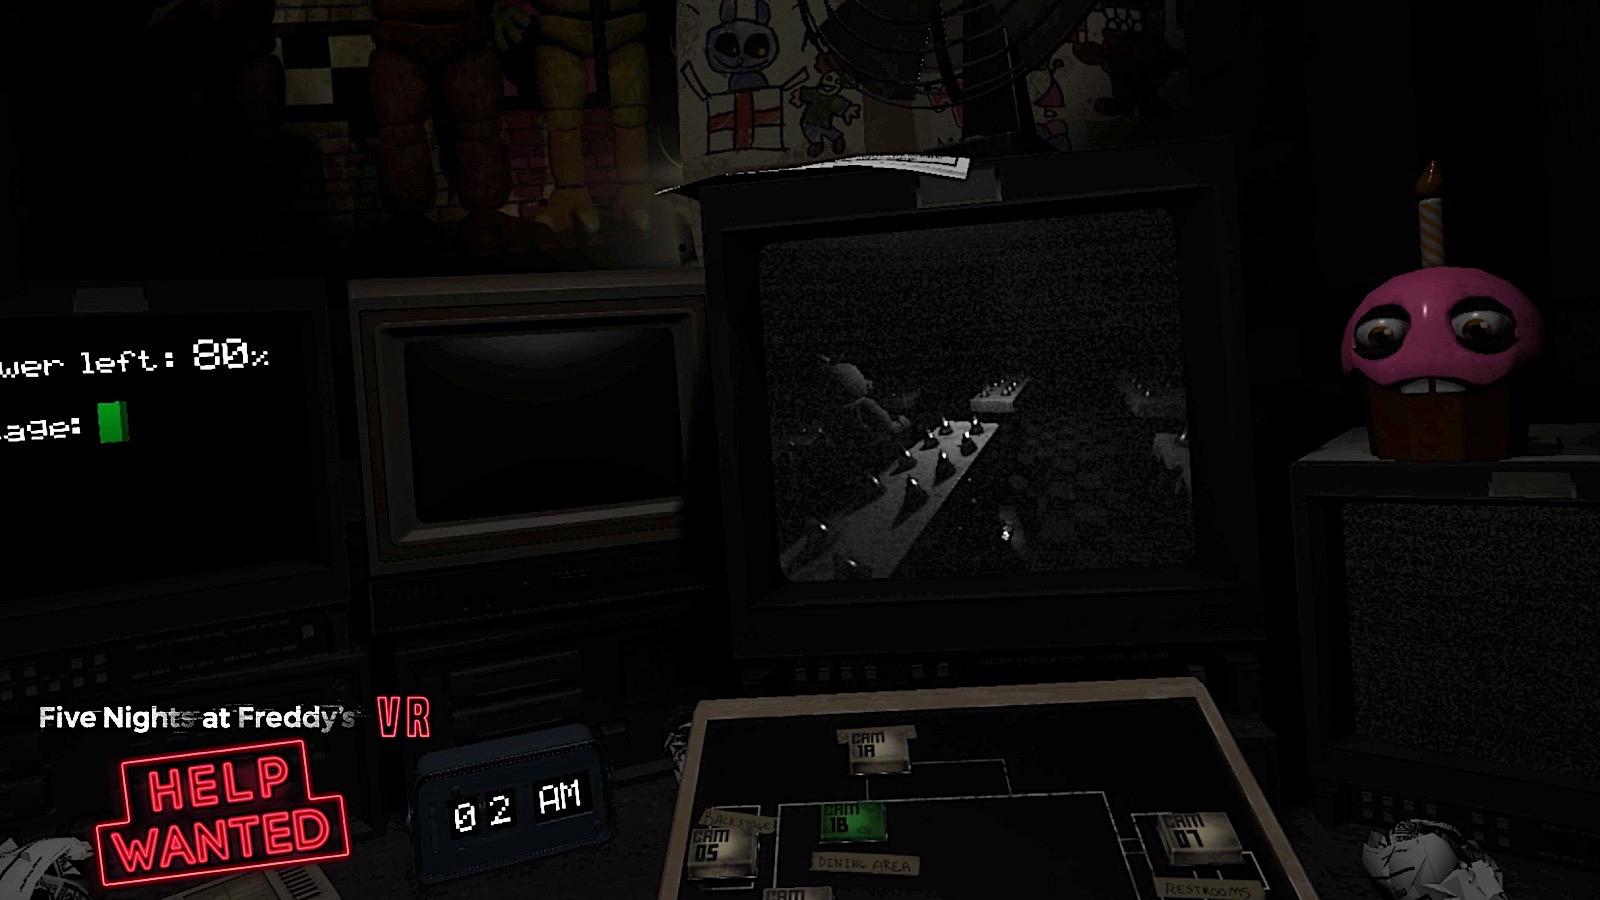 Five Nights at Freddy's' is even more creepy in VR